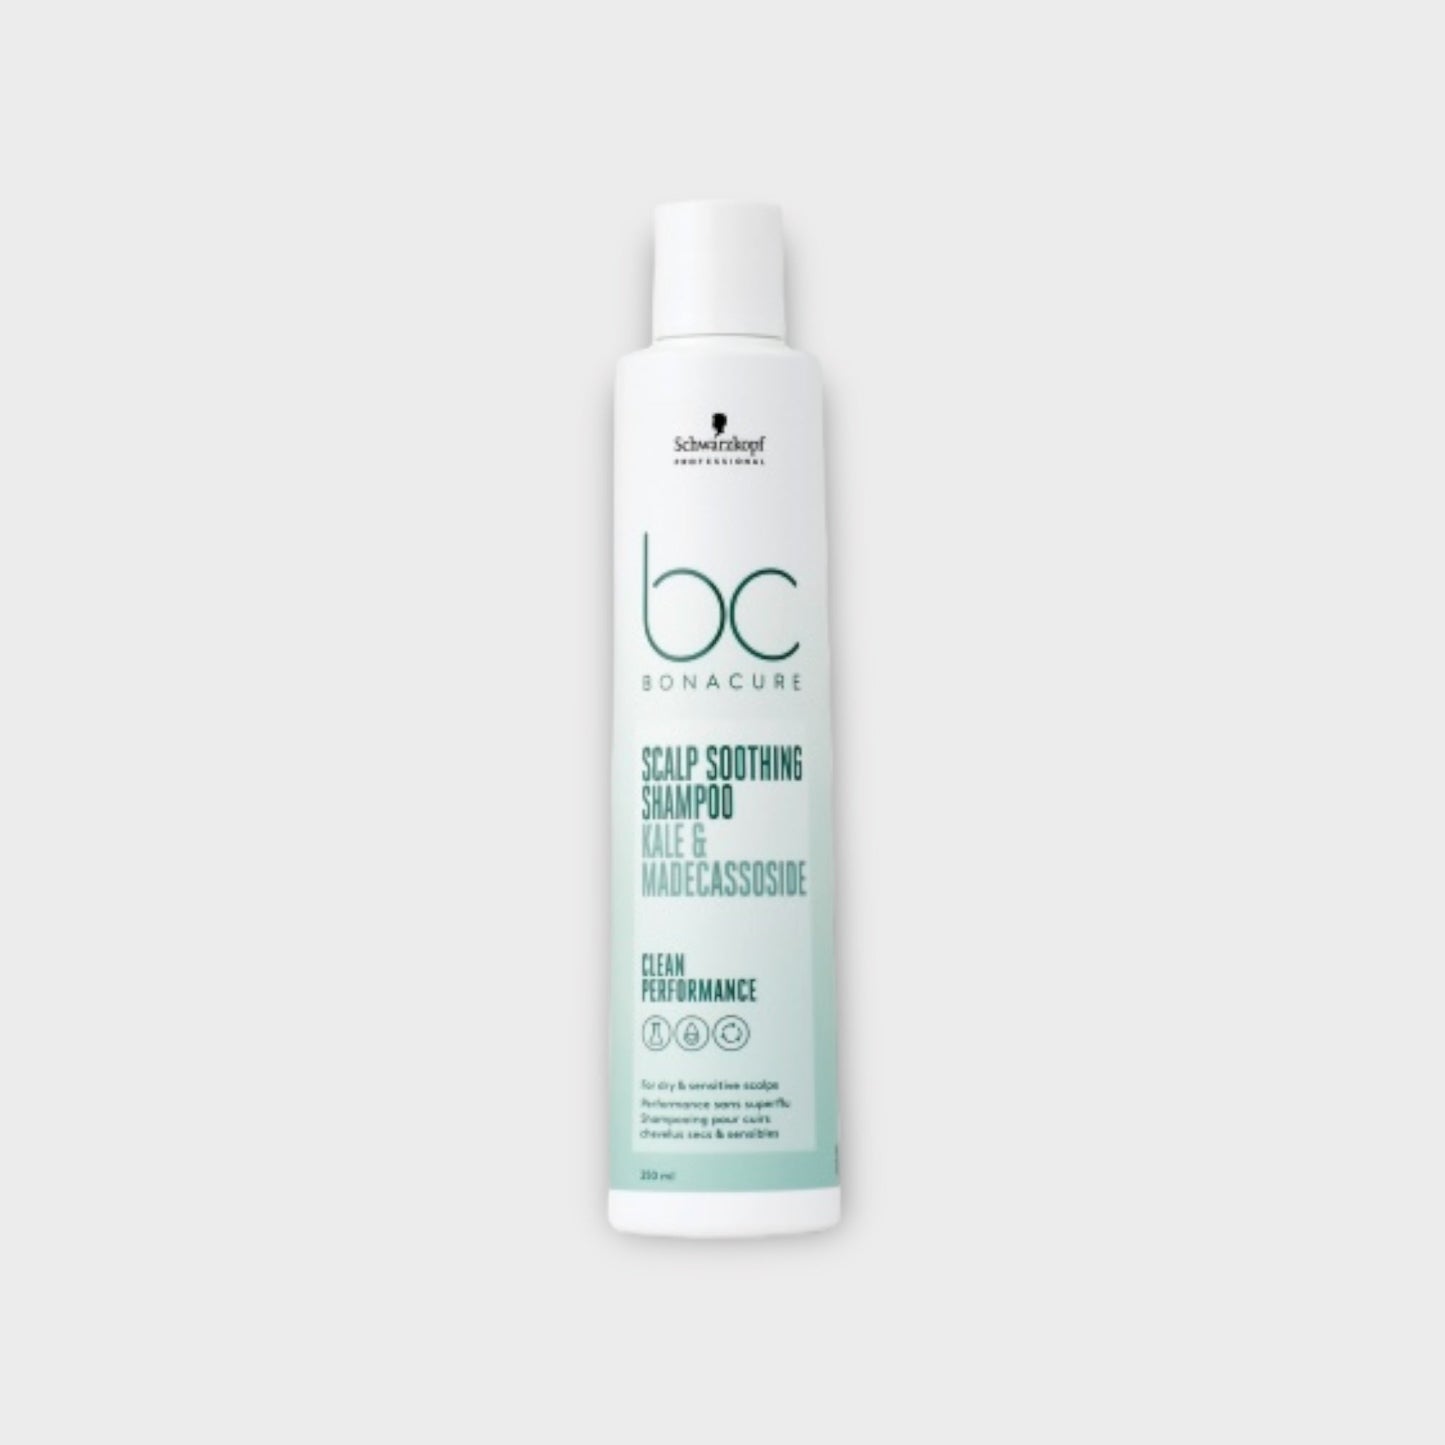 Bonacure Scalp Soothing Shampoo - 250 ml - Wash it Out